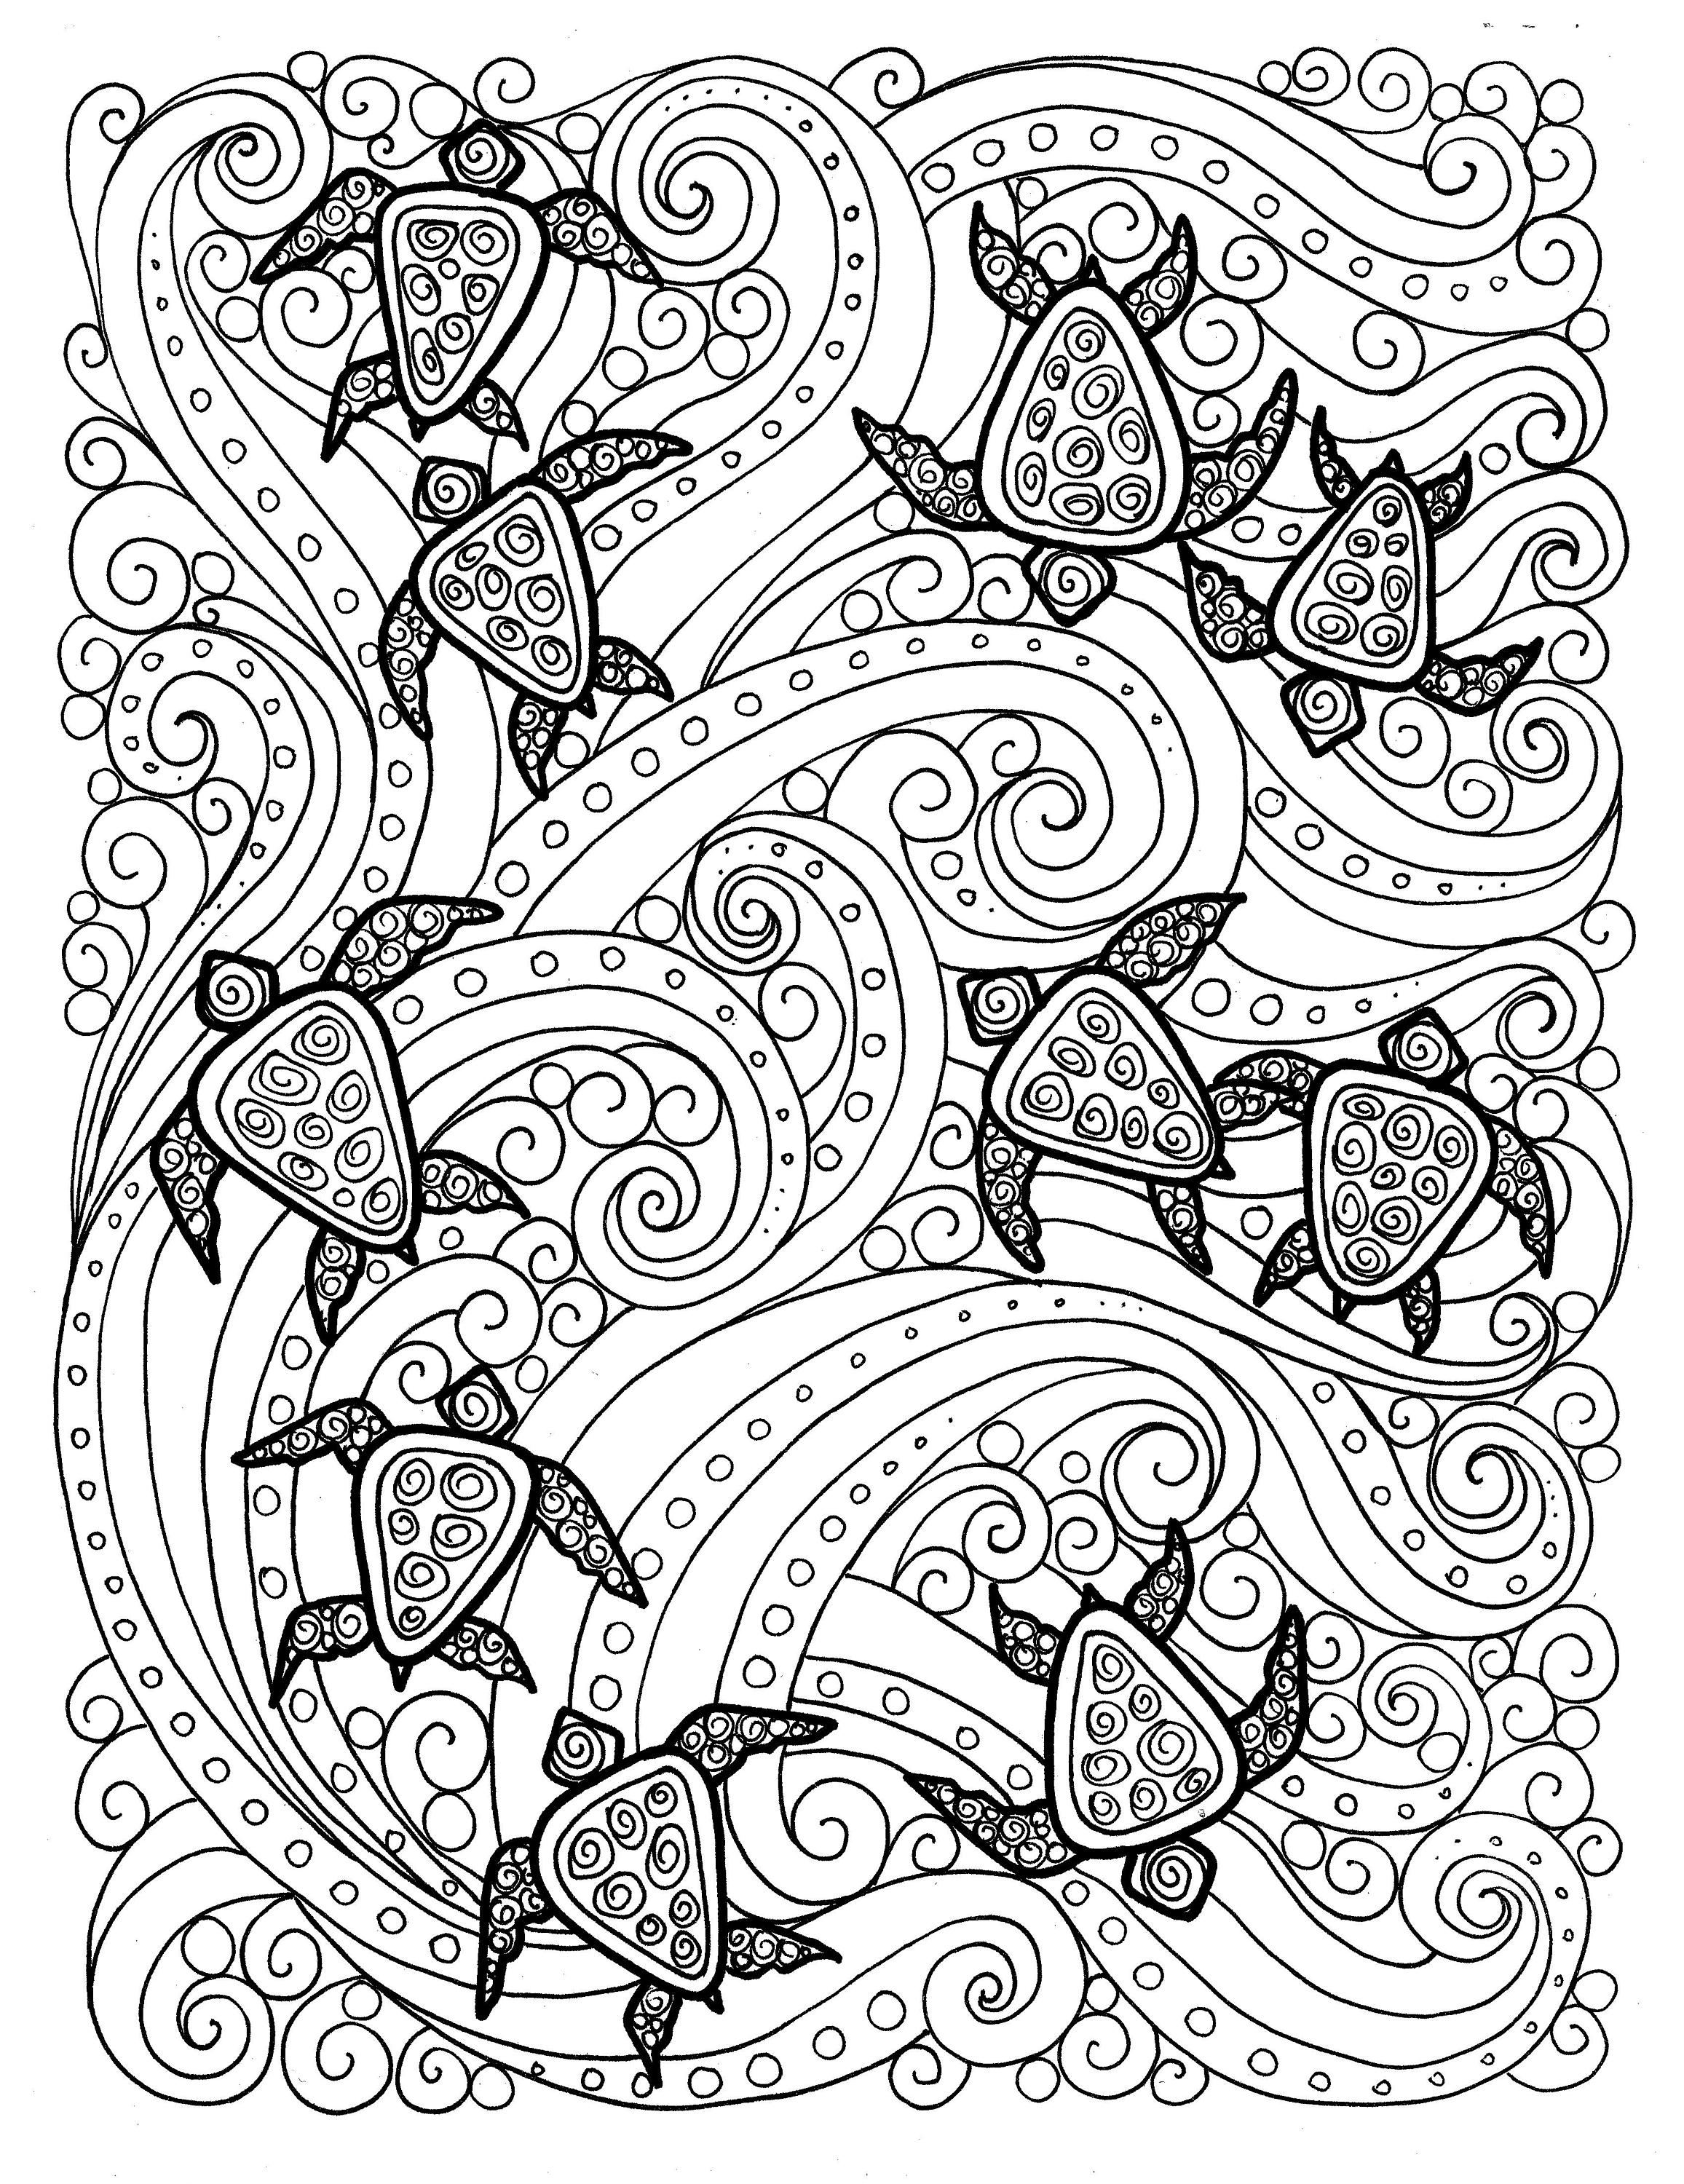 Pages digital coloring sea turtle adult coloringseaturtlebeachmarine lifedigi stampcoloring bookcoloring pages